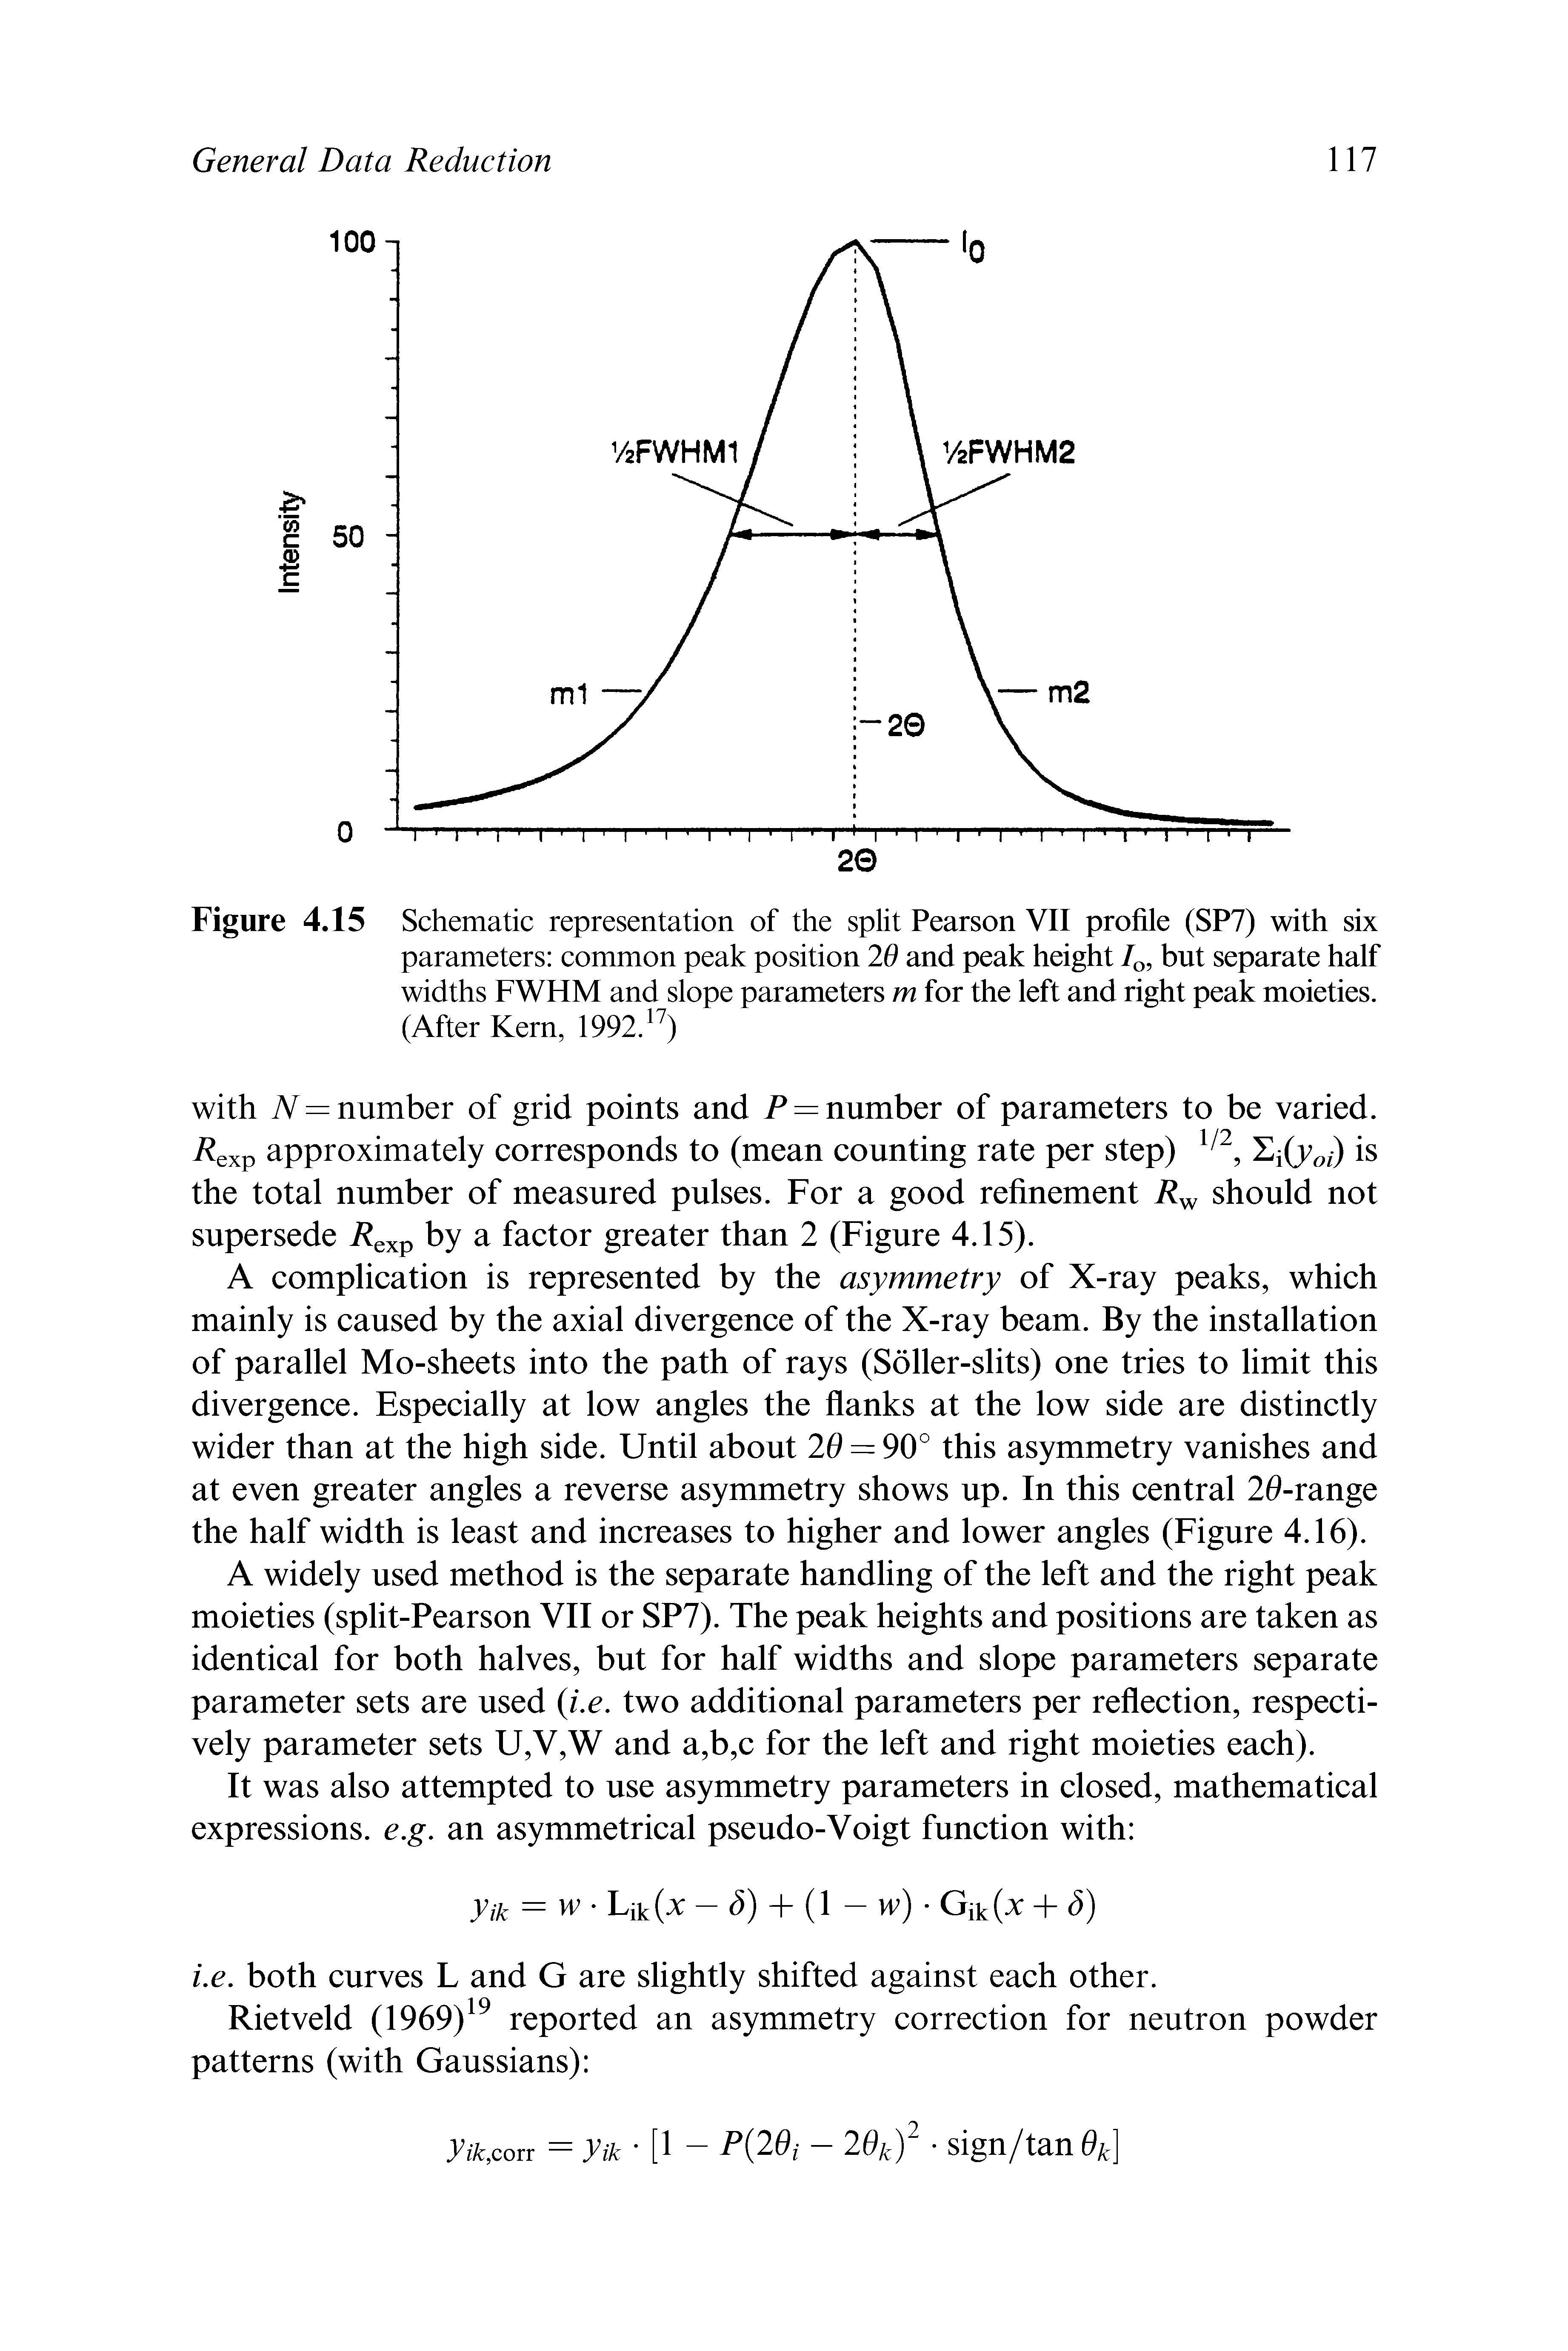 Schematic representation of the split Pearson VII profile (SP7) with six parameters common peak position 20 and peak height but separate half widths FWHM and slope parameters m for the left and right peak moieties. (After Kern, 1992. )...